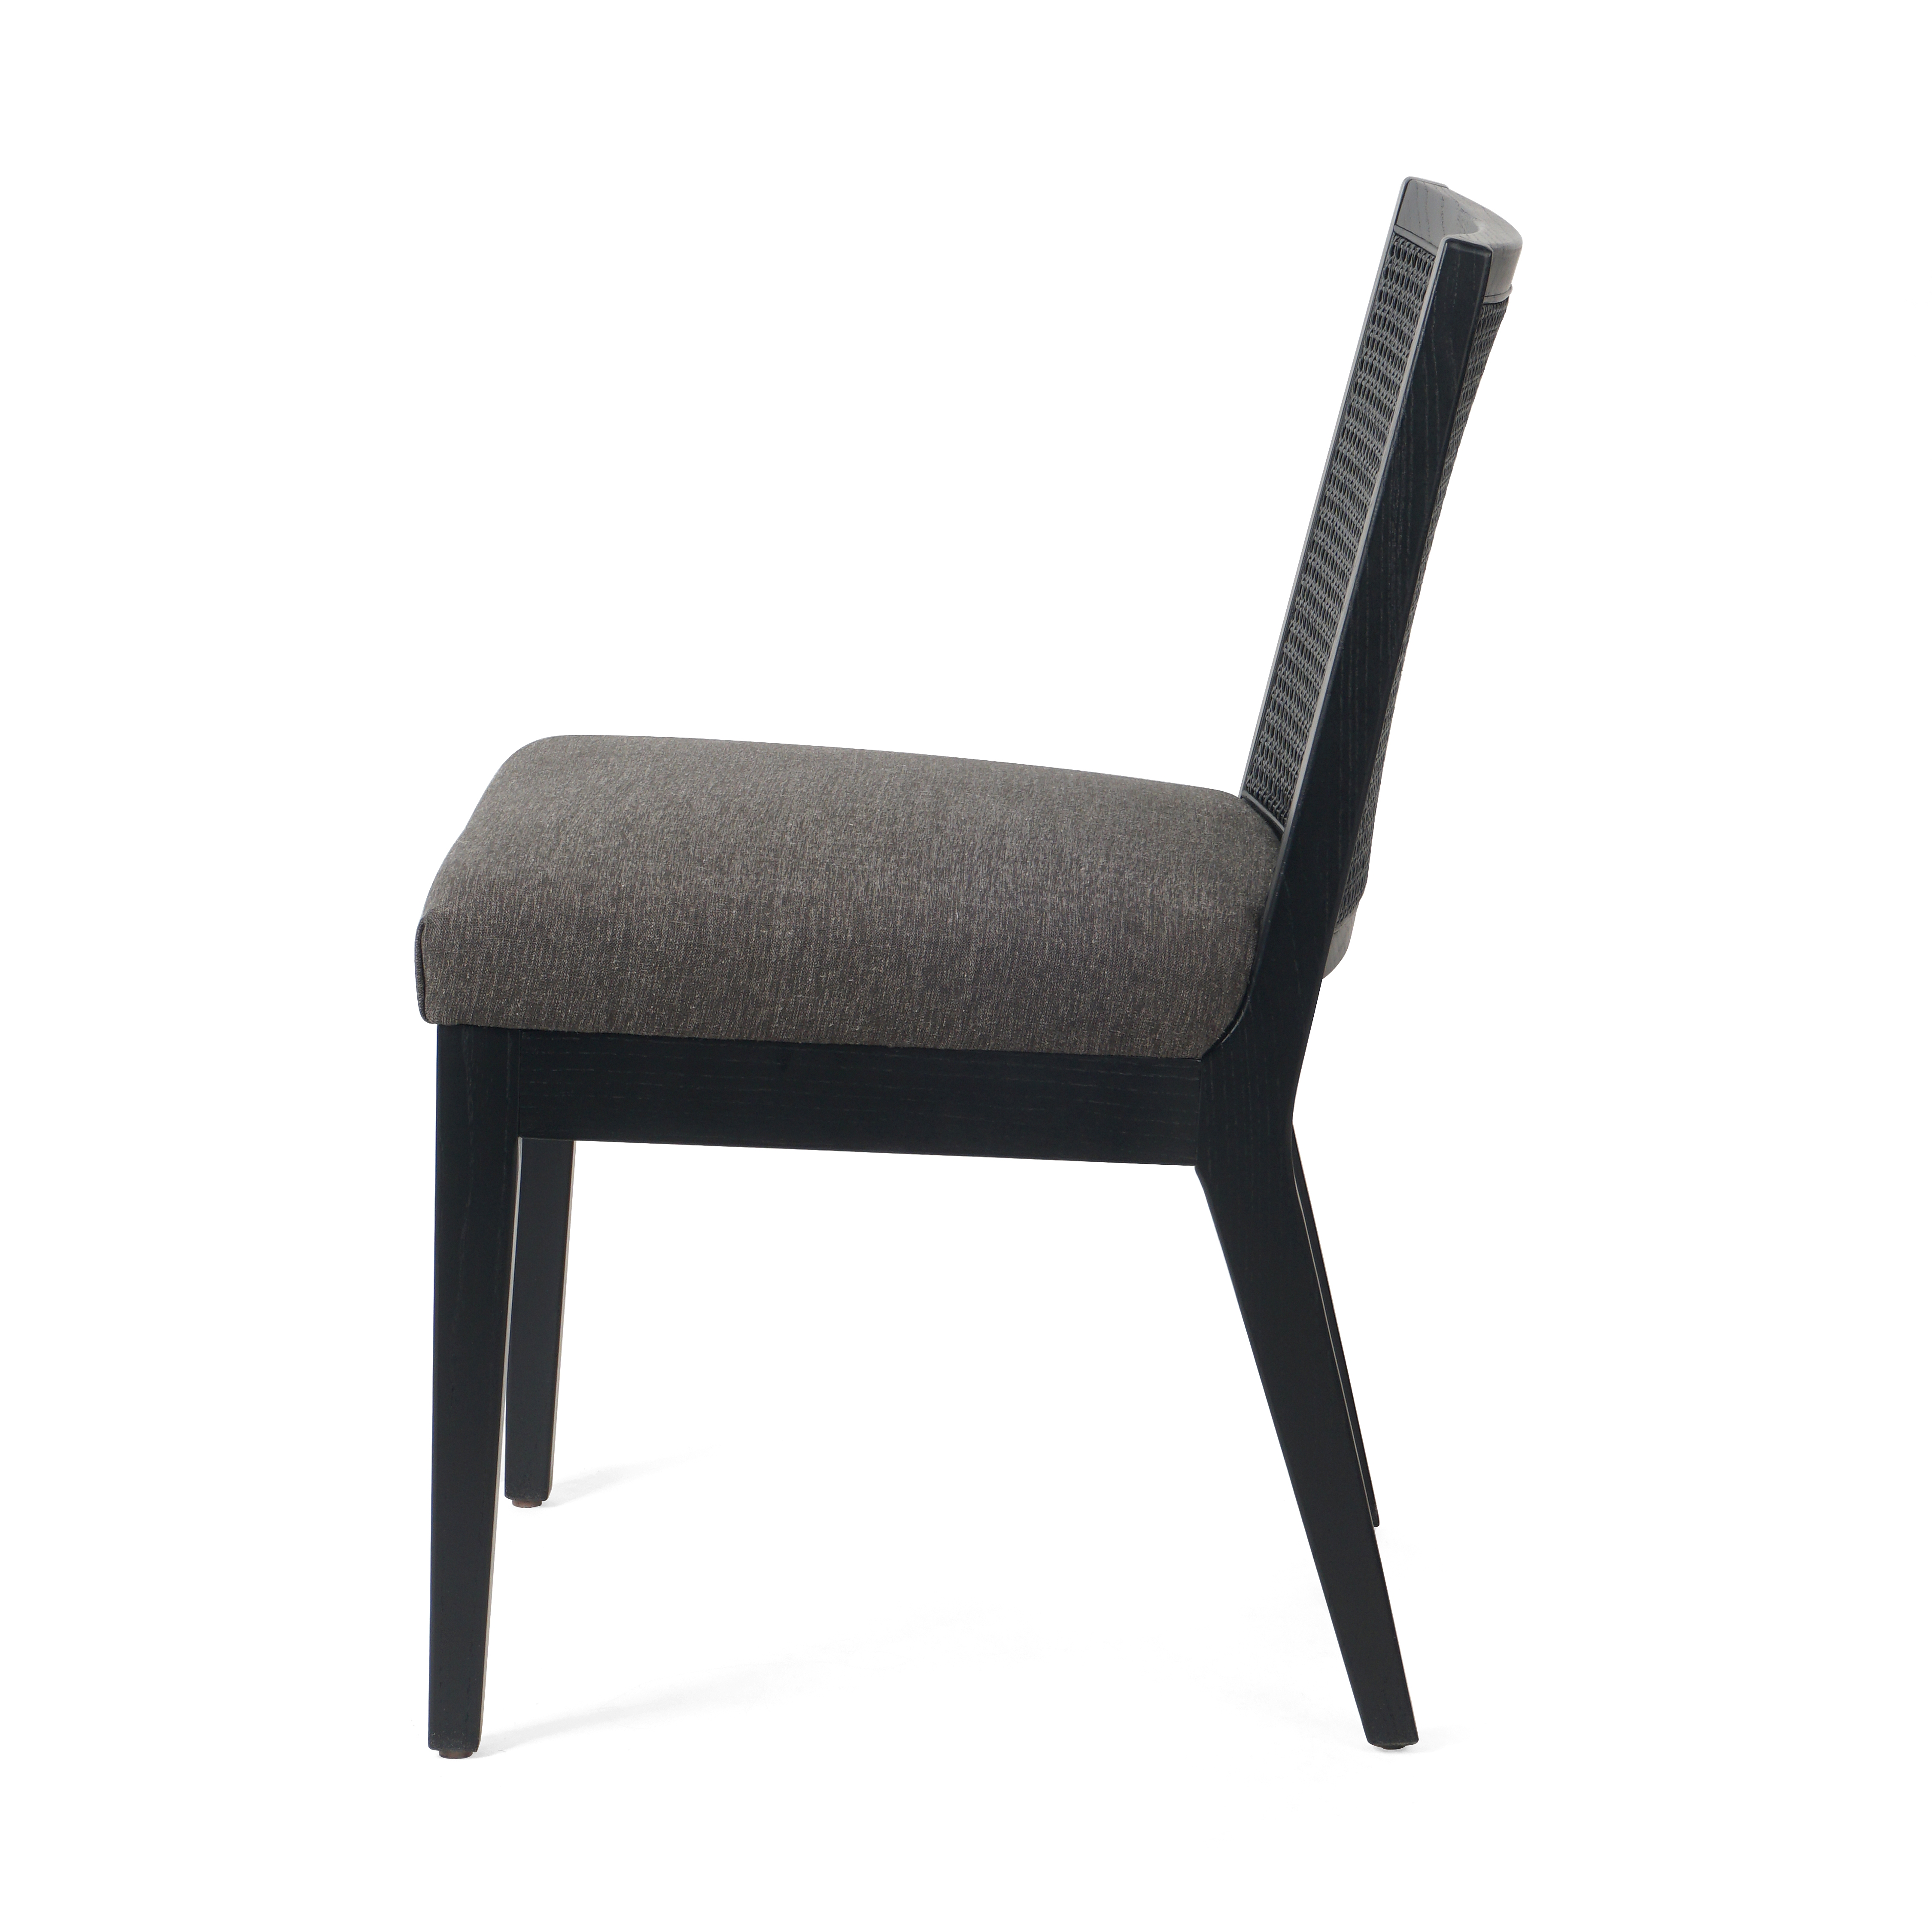 Antonia Armless Dining Chair-Charcl - Image 3